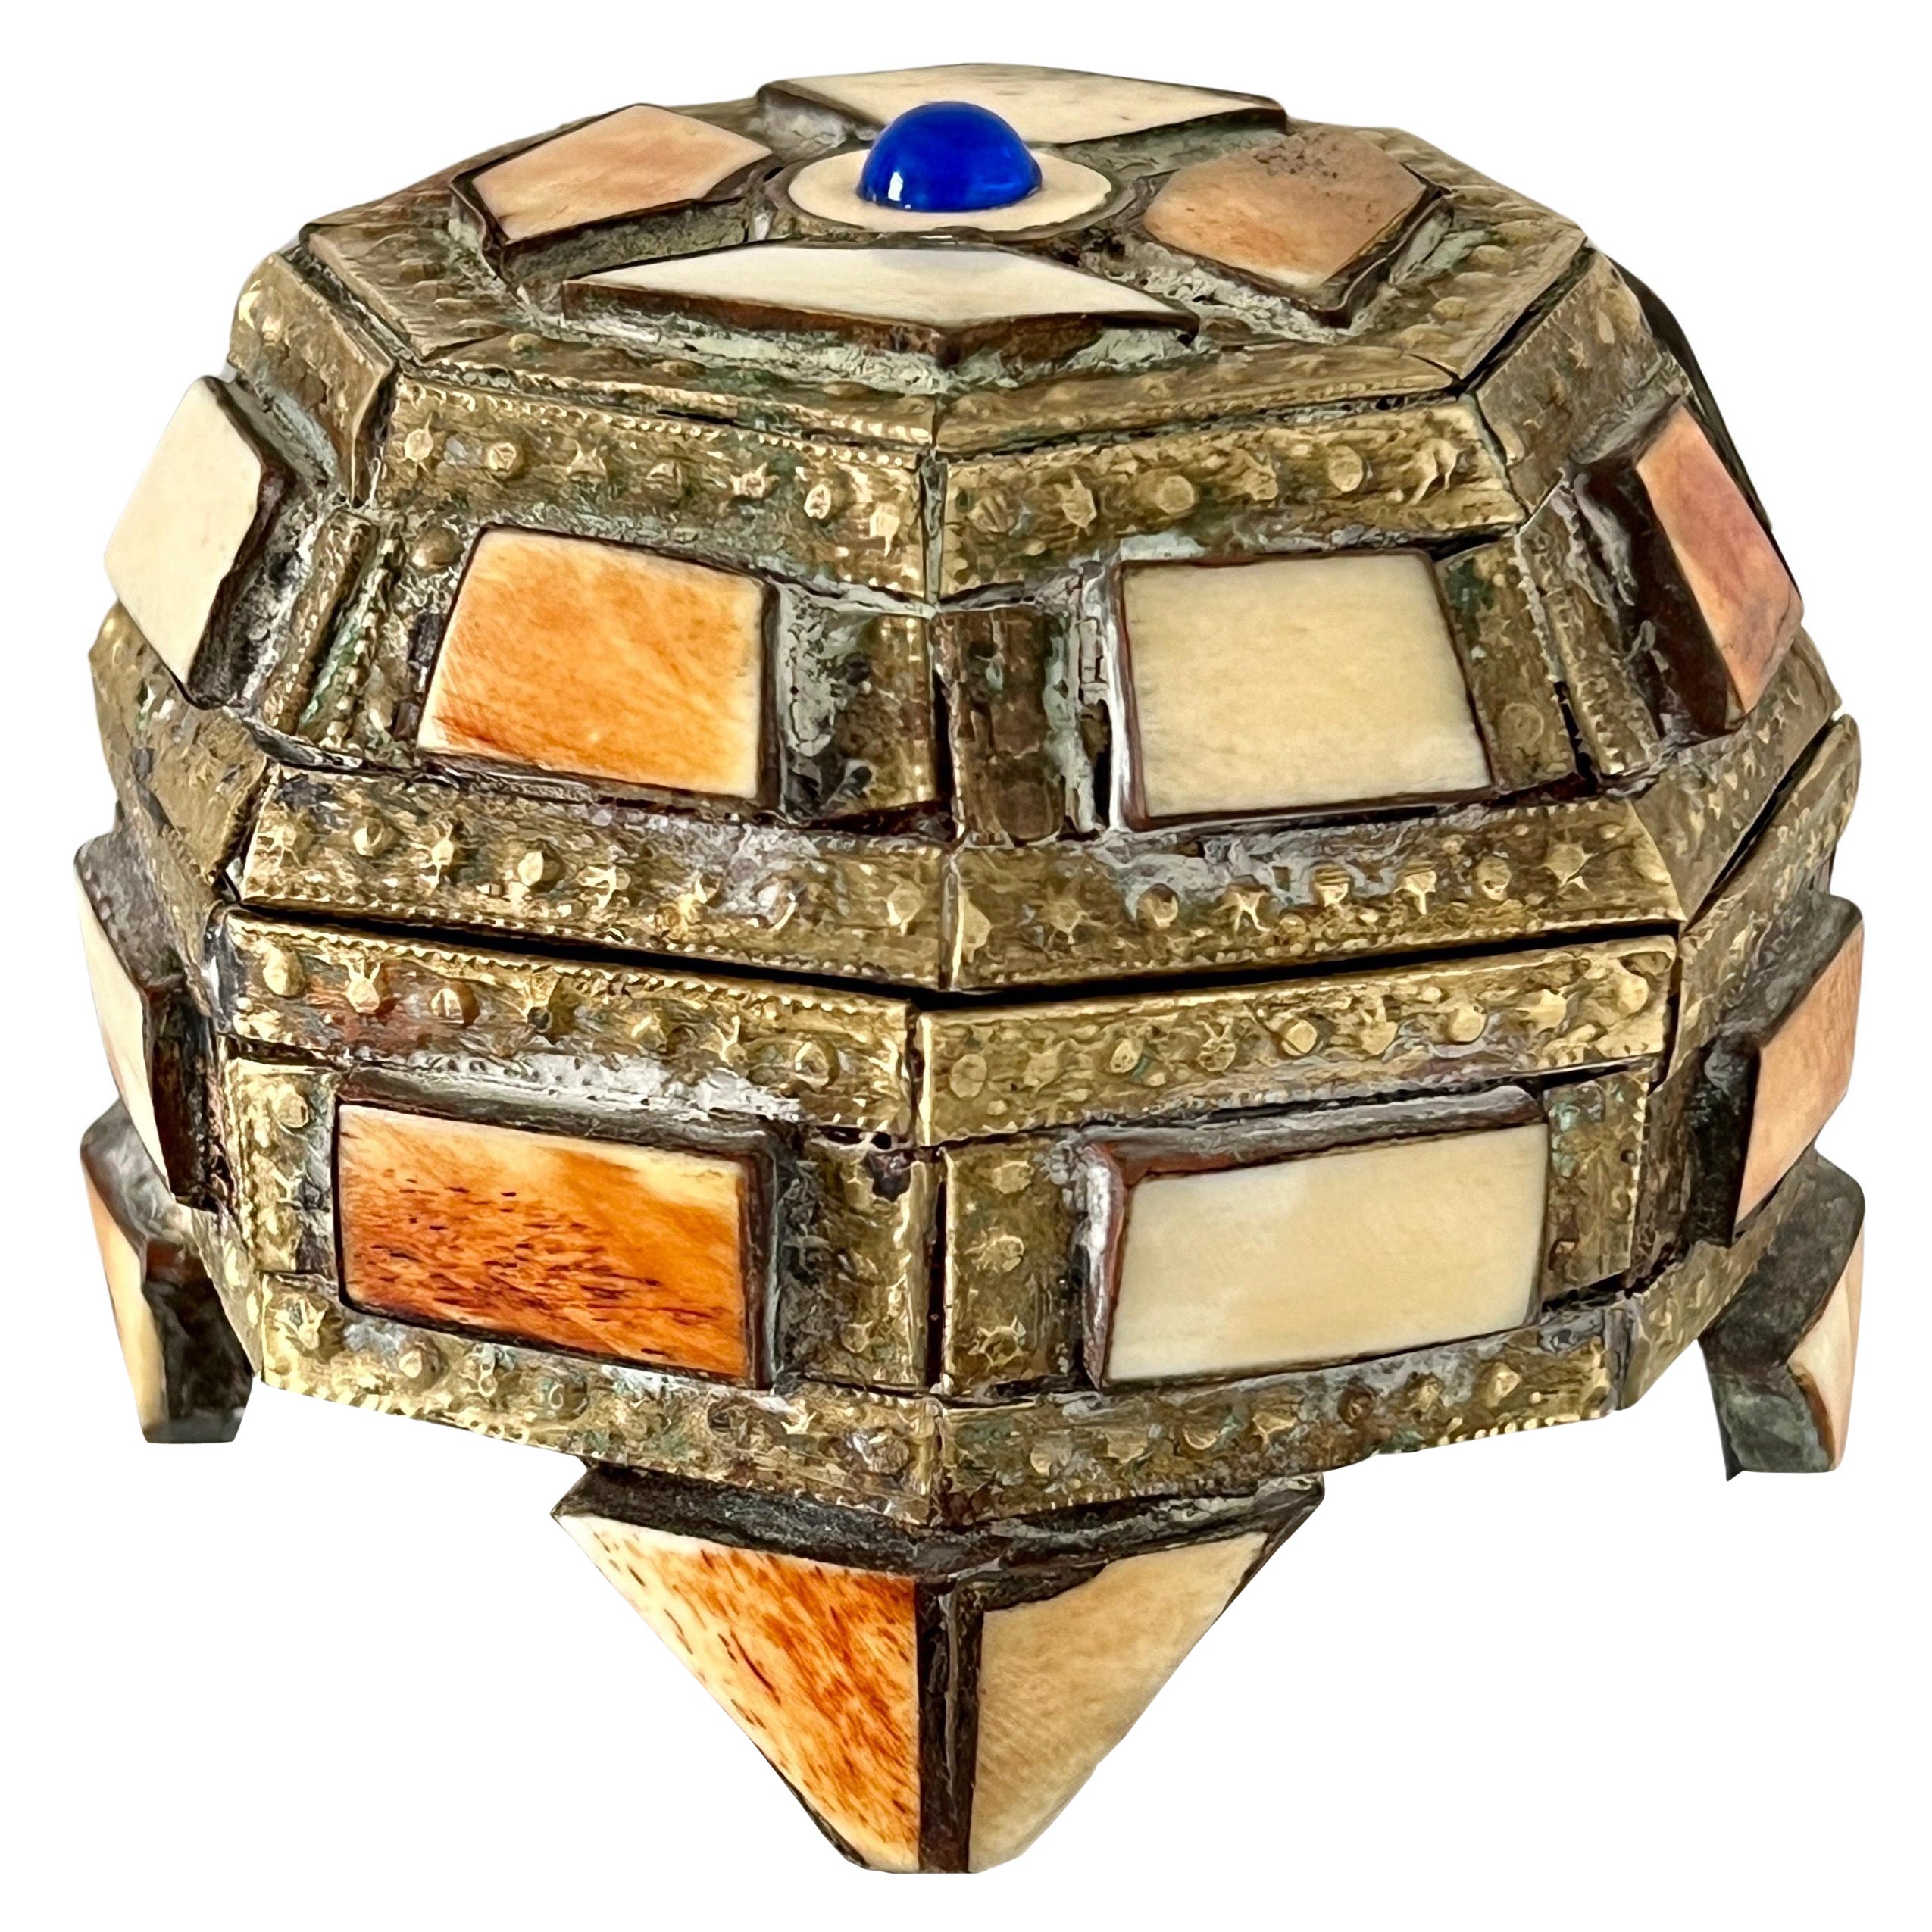 Geometric Trinket Box in Brass with Bone Inlay, Handcrafted in Morocco, 1970's